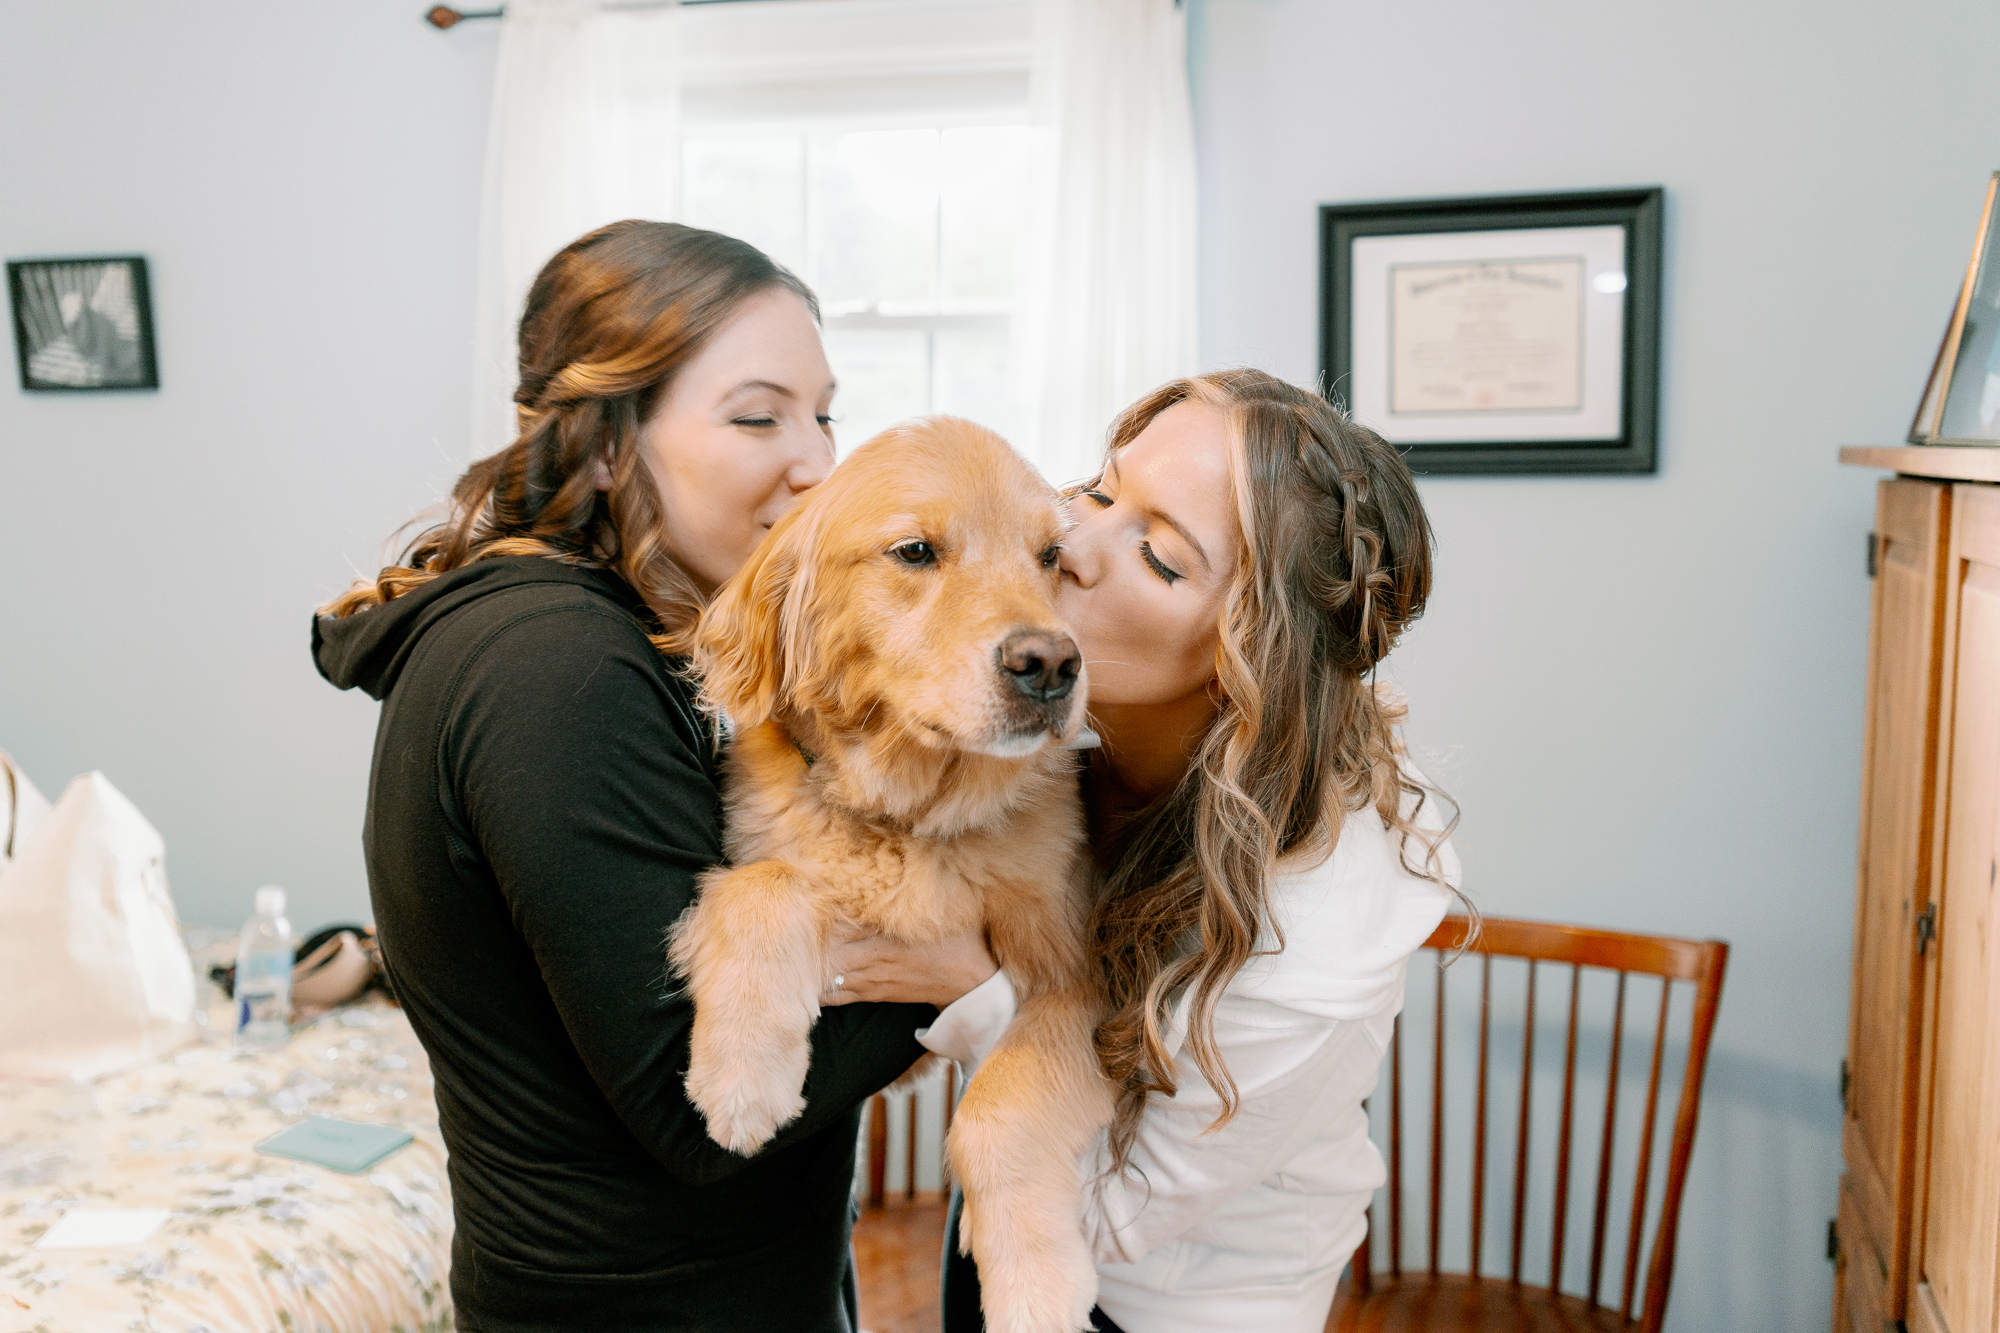 Sweet Wedding Photos with Dogs